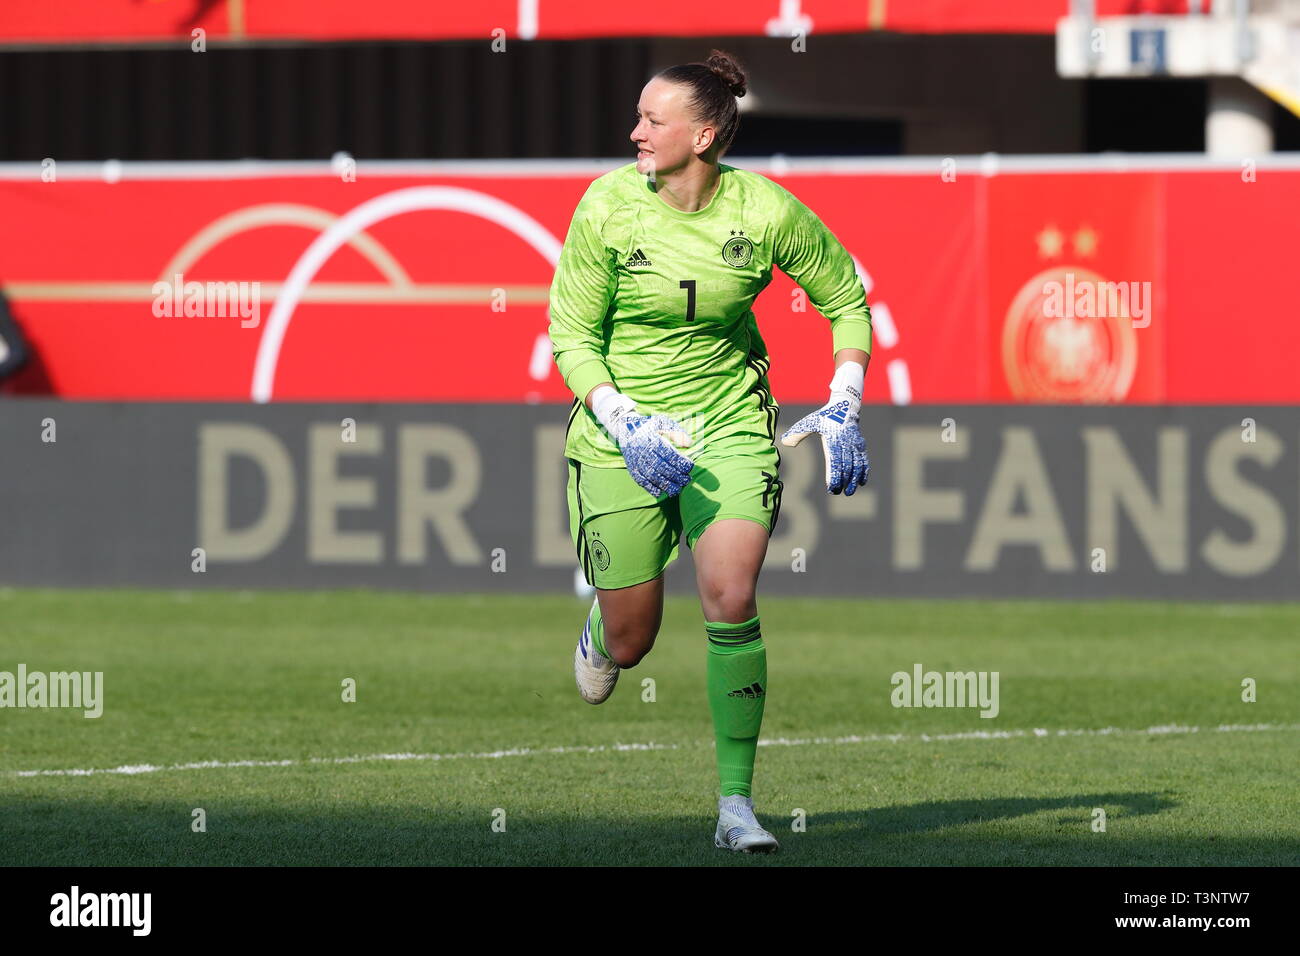 Almuth Schult (GER), APRIL 9, 2019 - Football / Soccer : International Friendly match between Germany 2-2 Japan at the Benteler-Arena in Paderborn, Germany. (Photo by Mutsu Kawamori/AFLO) Stock Photo